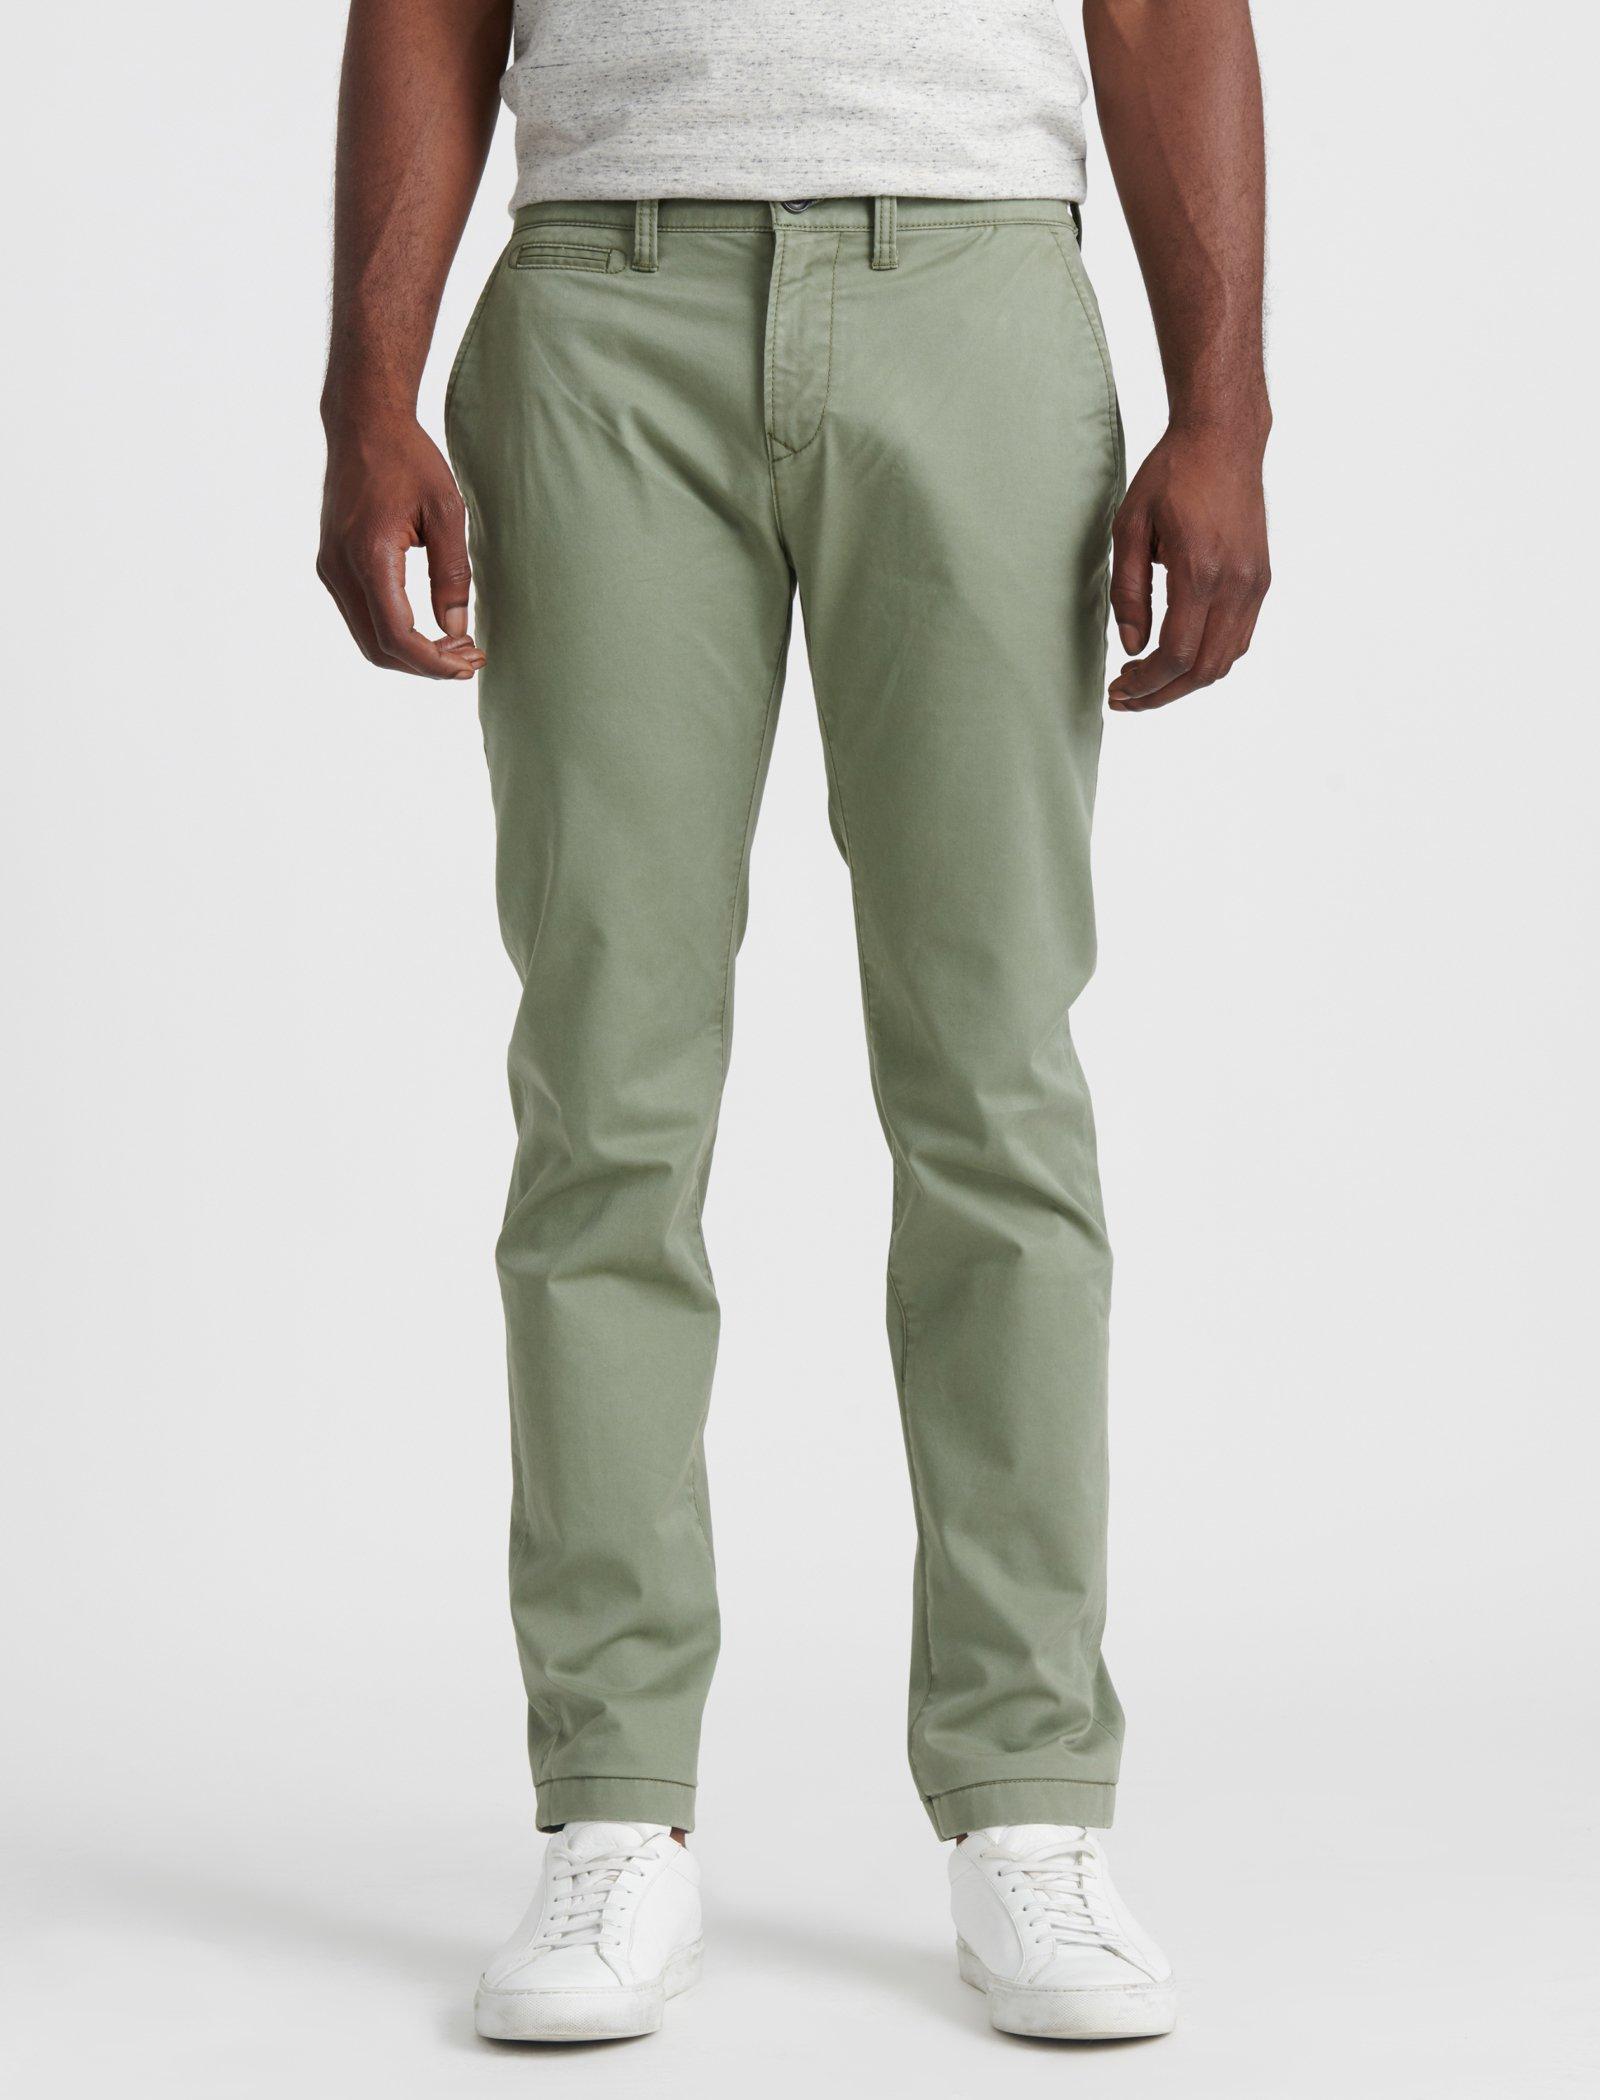 Men's Chinos & Casual Pants | Lucky Brand